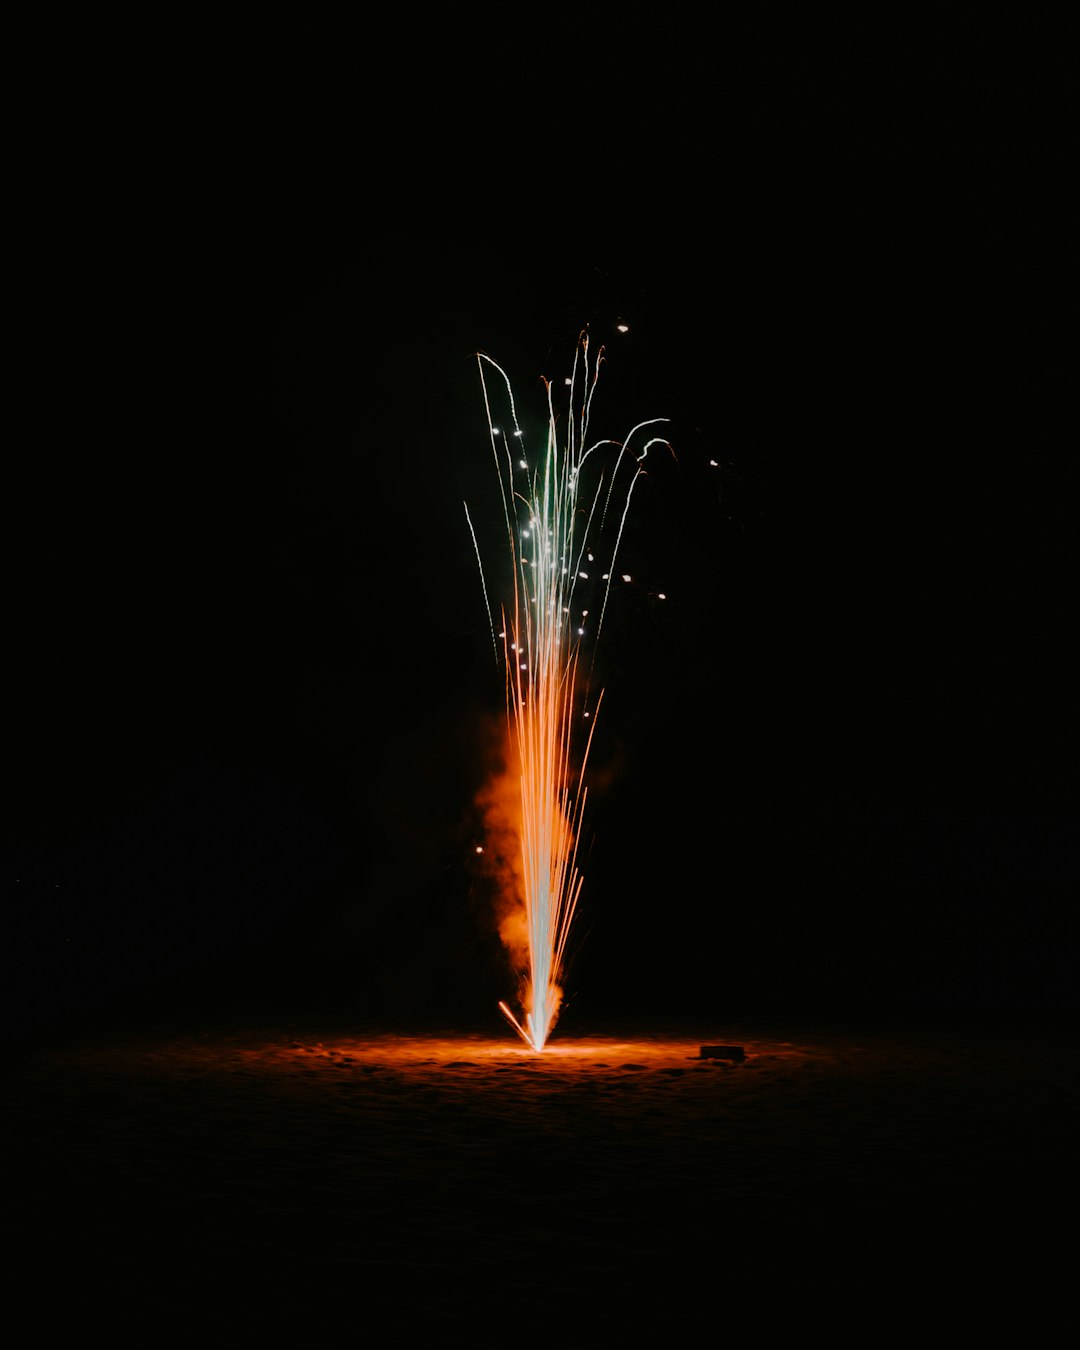 time lapse photography of fireworks